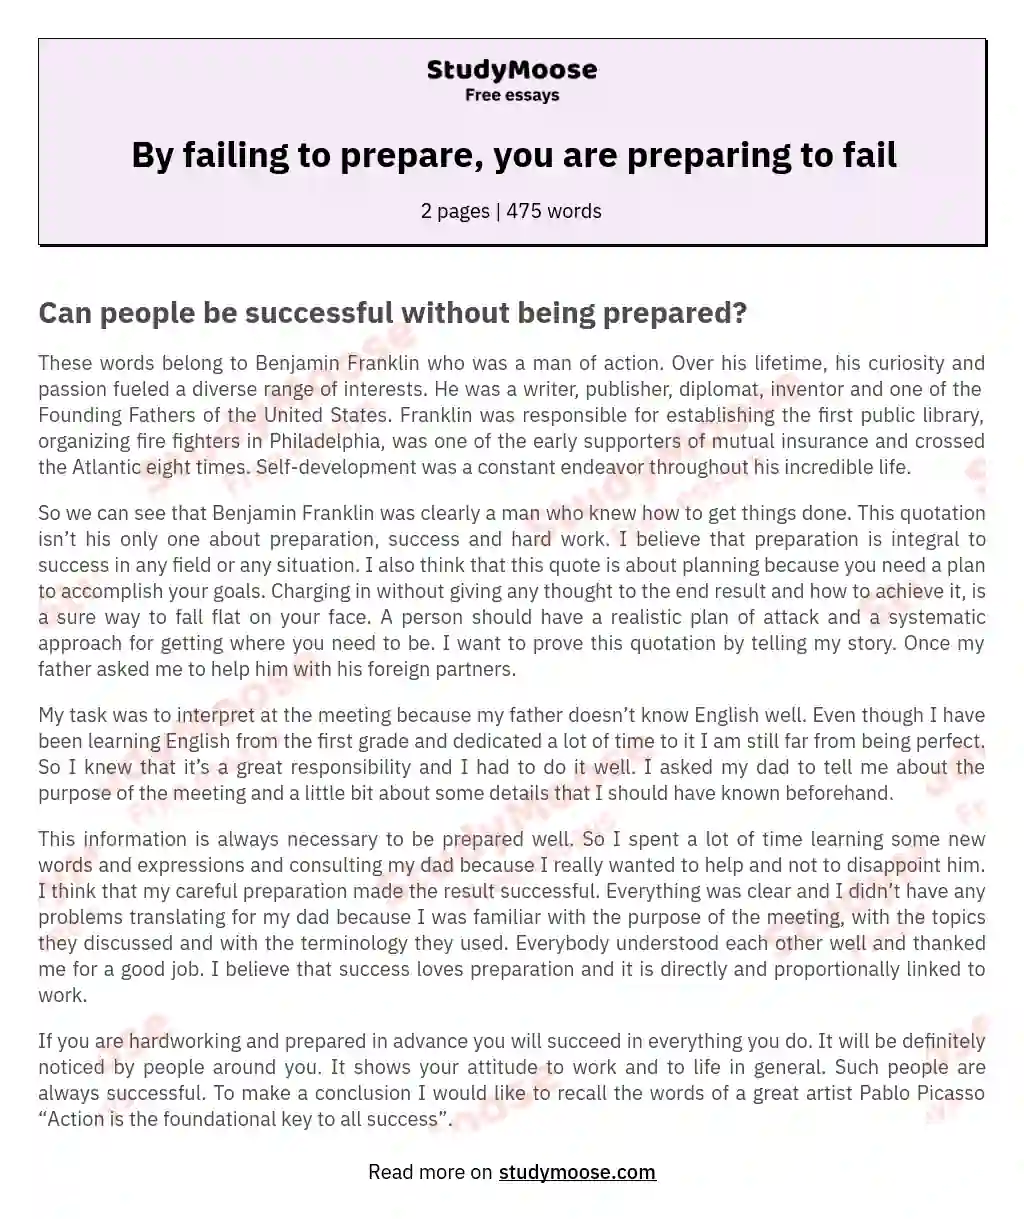 By failing to prepare, you are preparing to fail essay